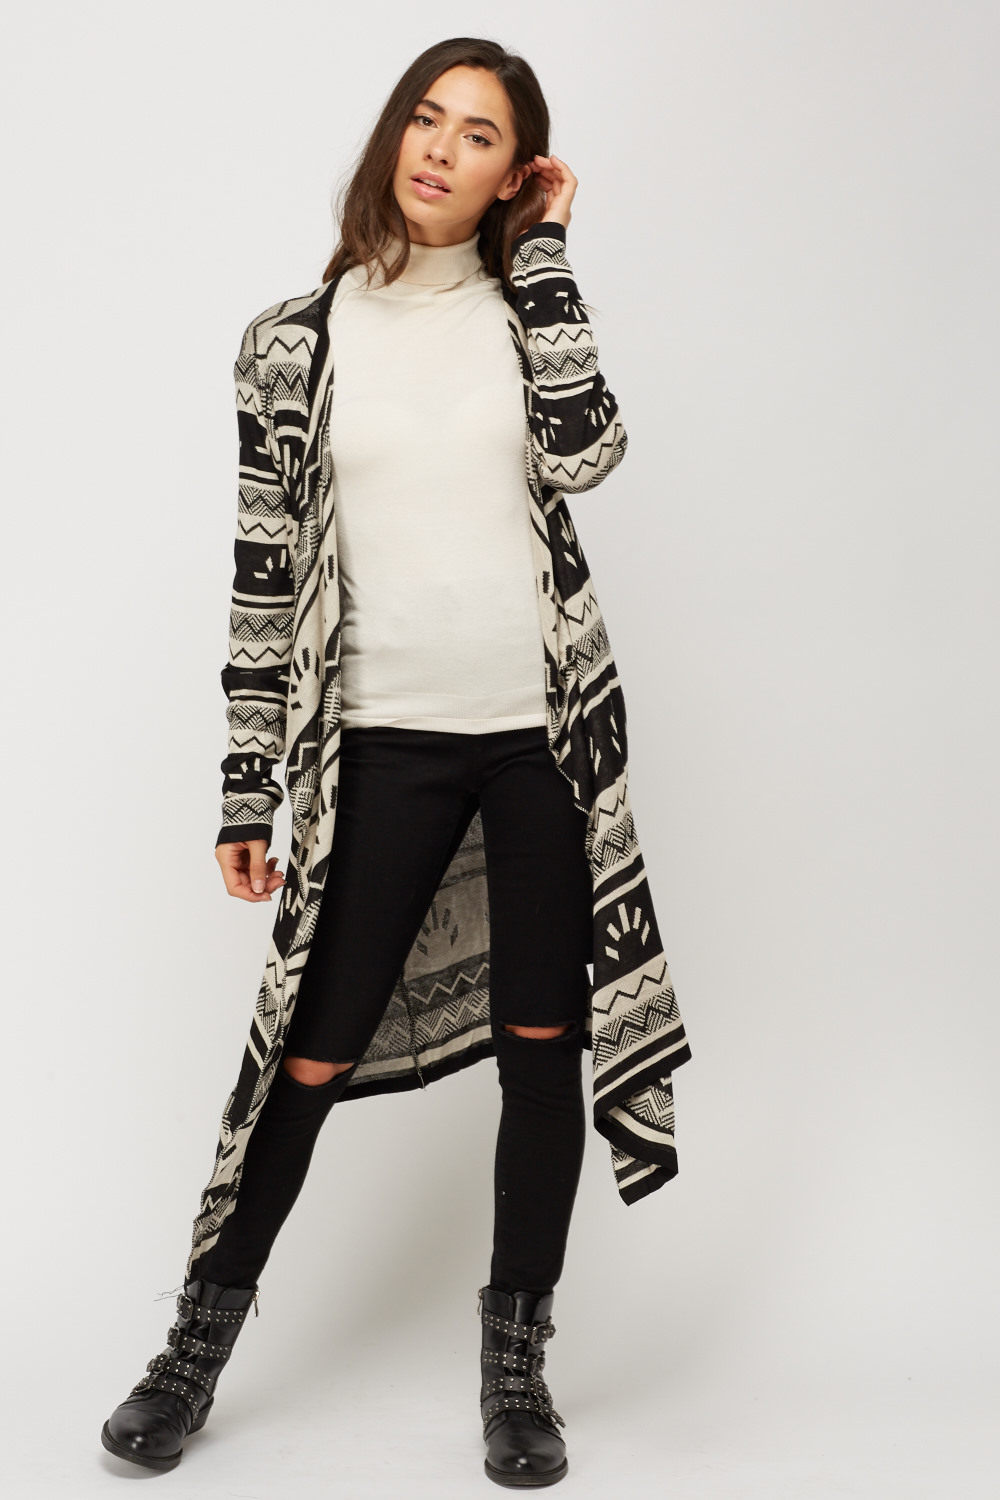 Aztec Thin Knitted Waterfall Cardigan - Just £5